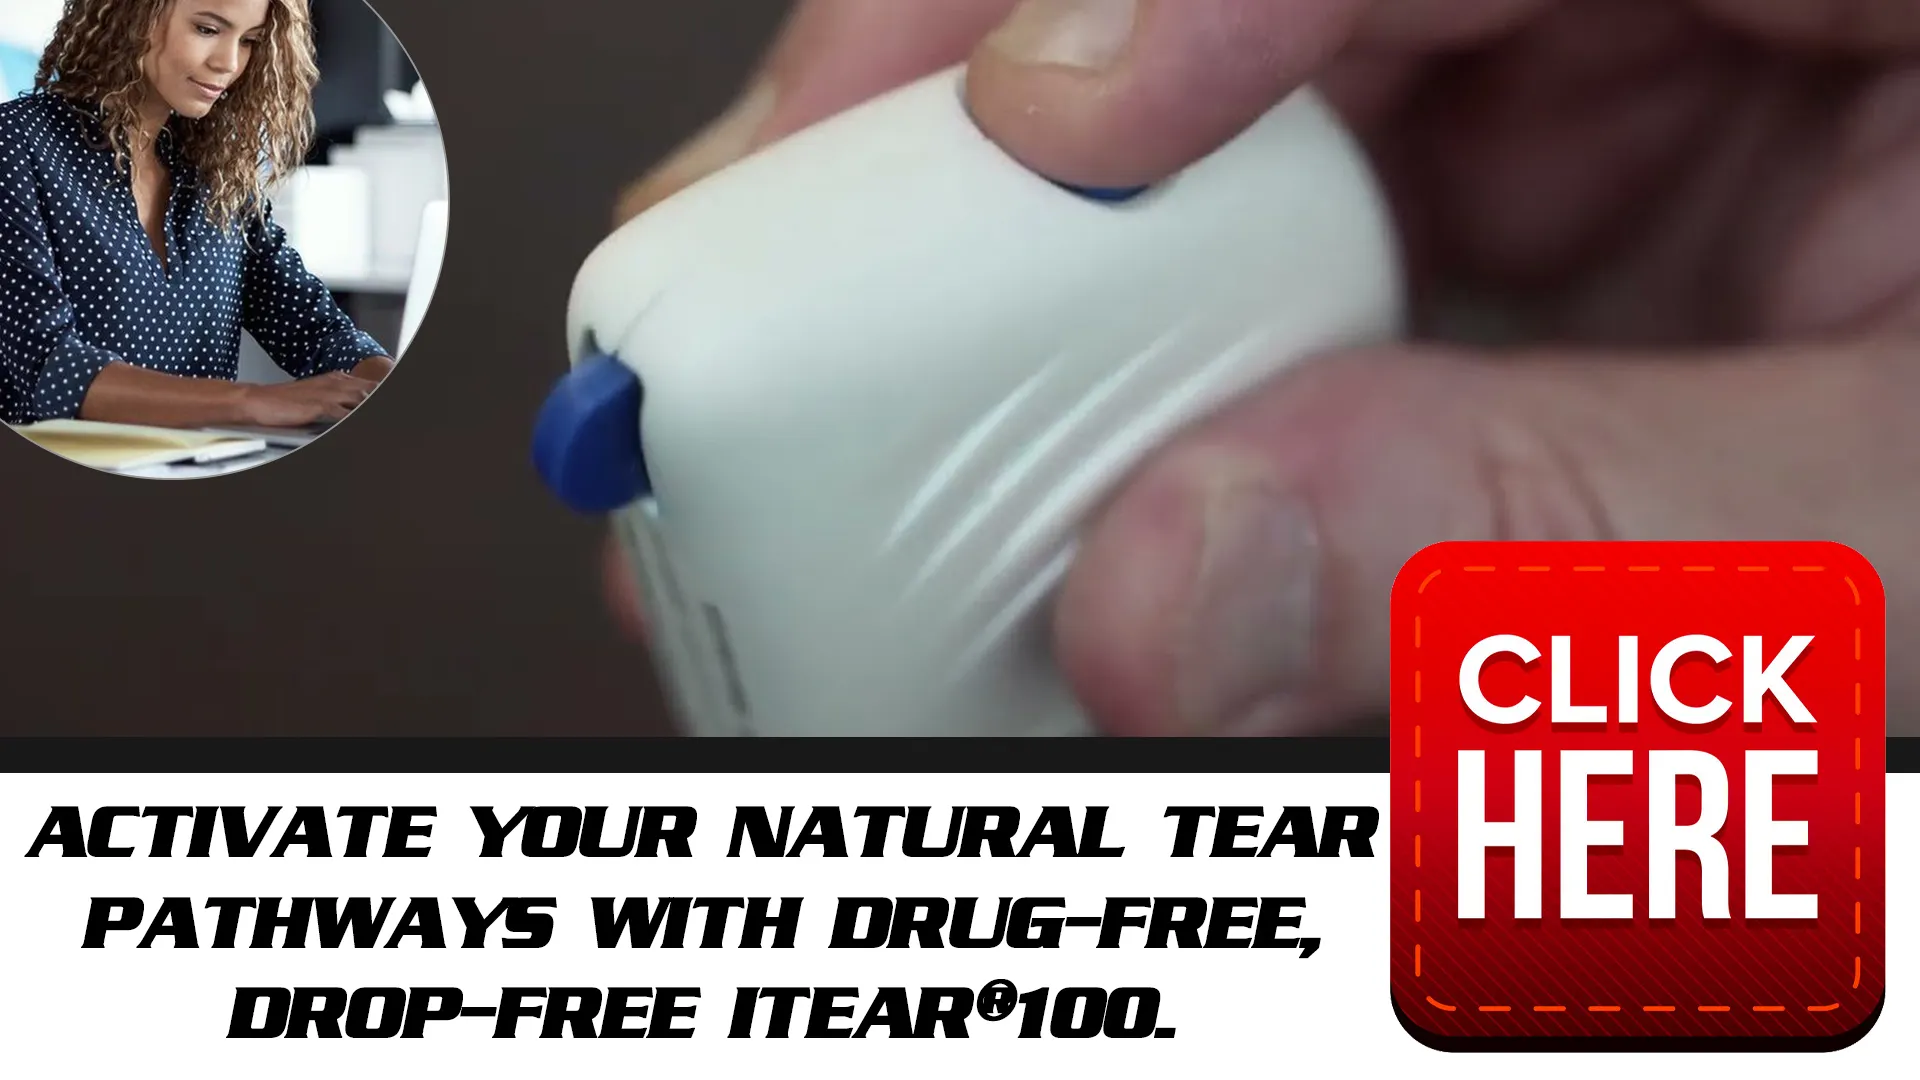 Comparing iTear100 to Traditional Eye Drops